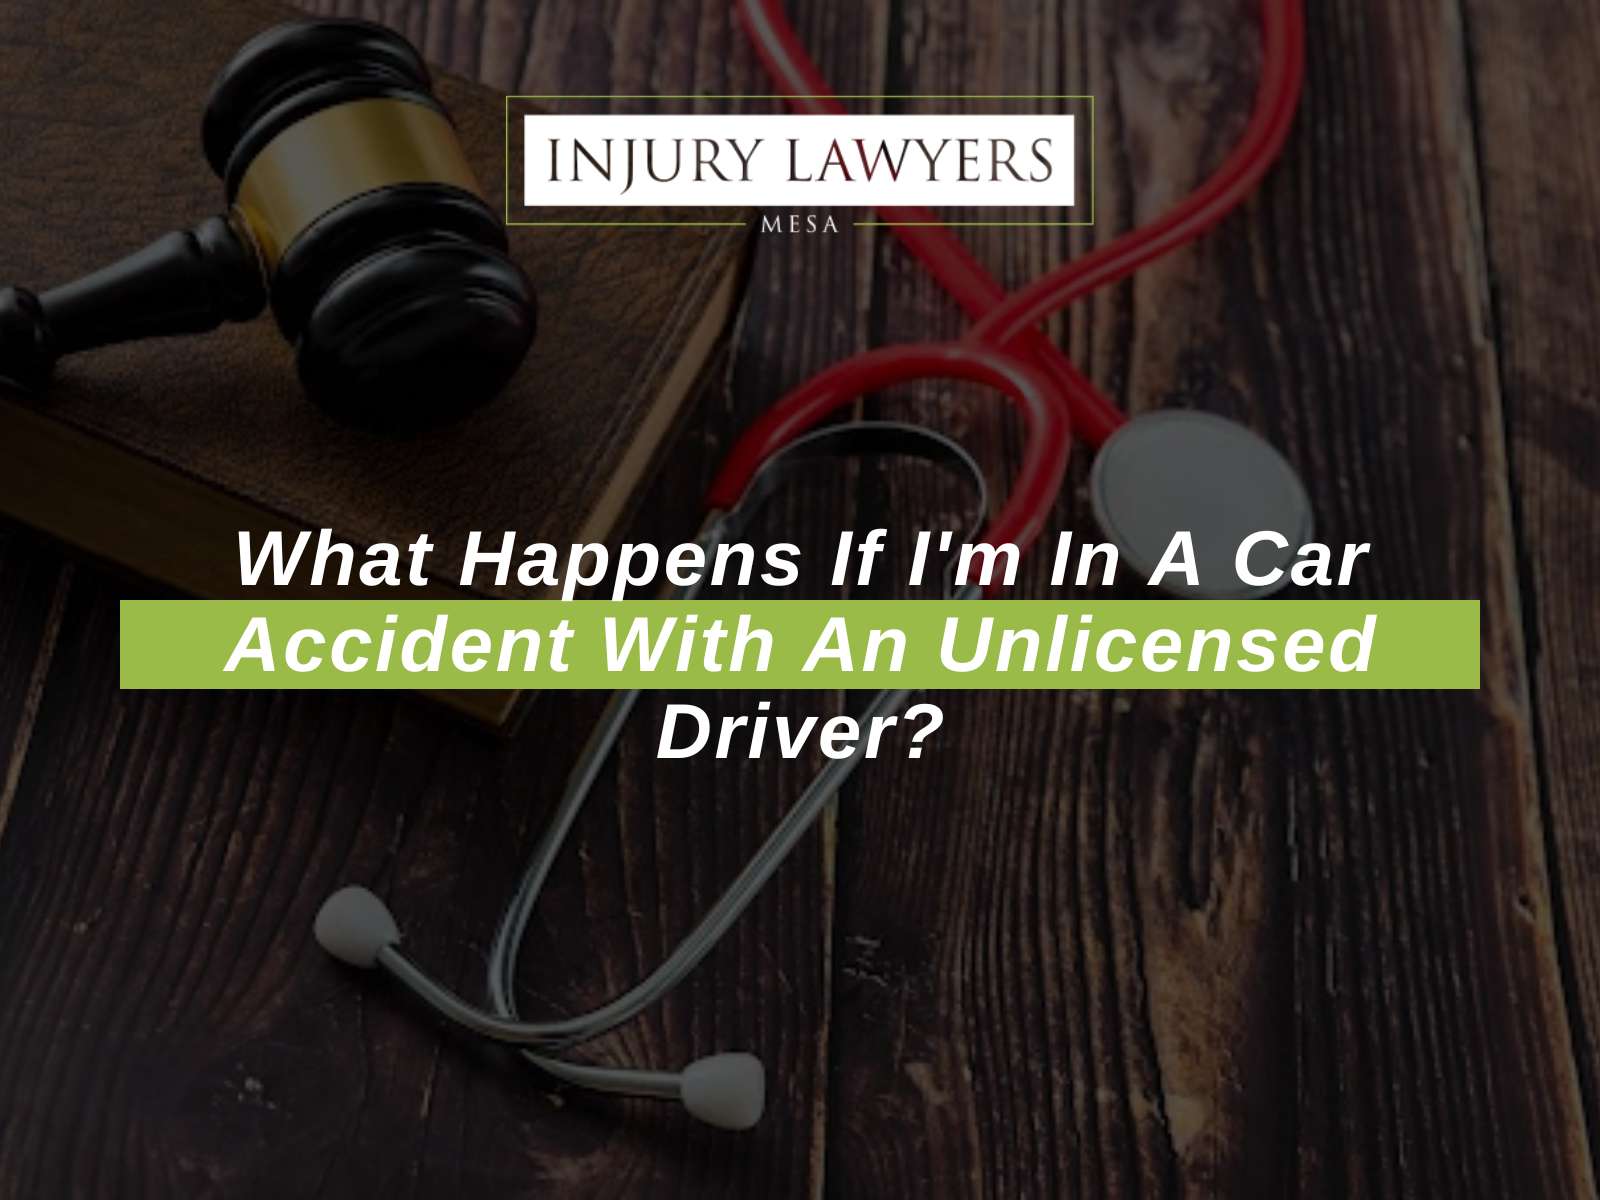 What Happens If I'm In A Car Accident With An Unlicensed Driver?